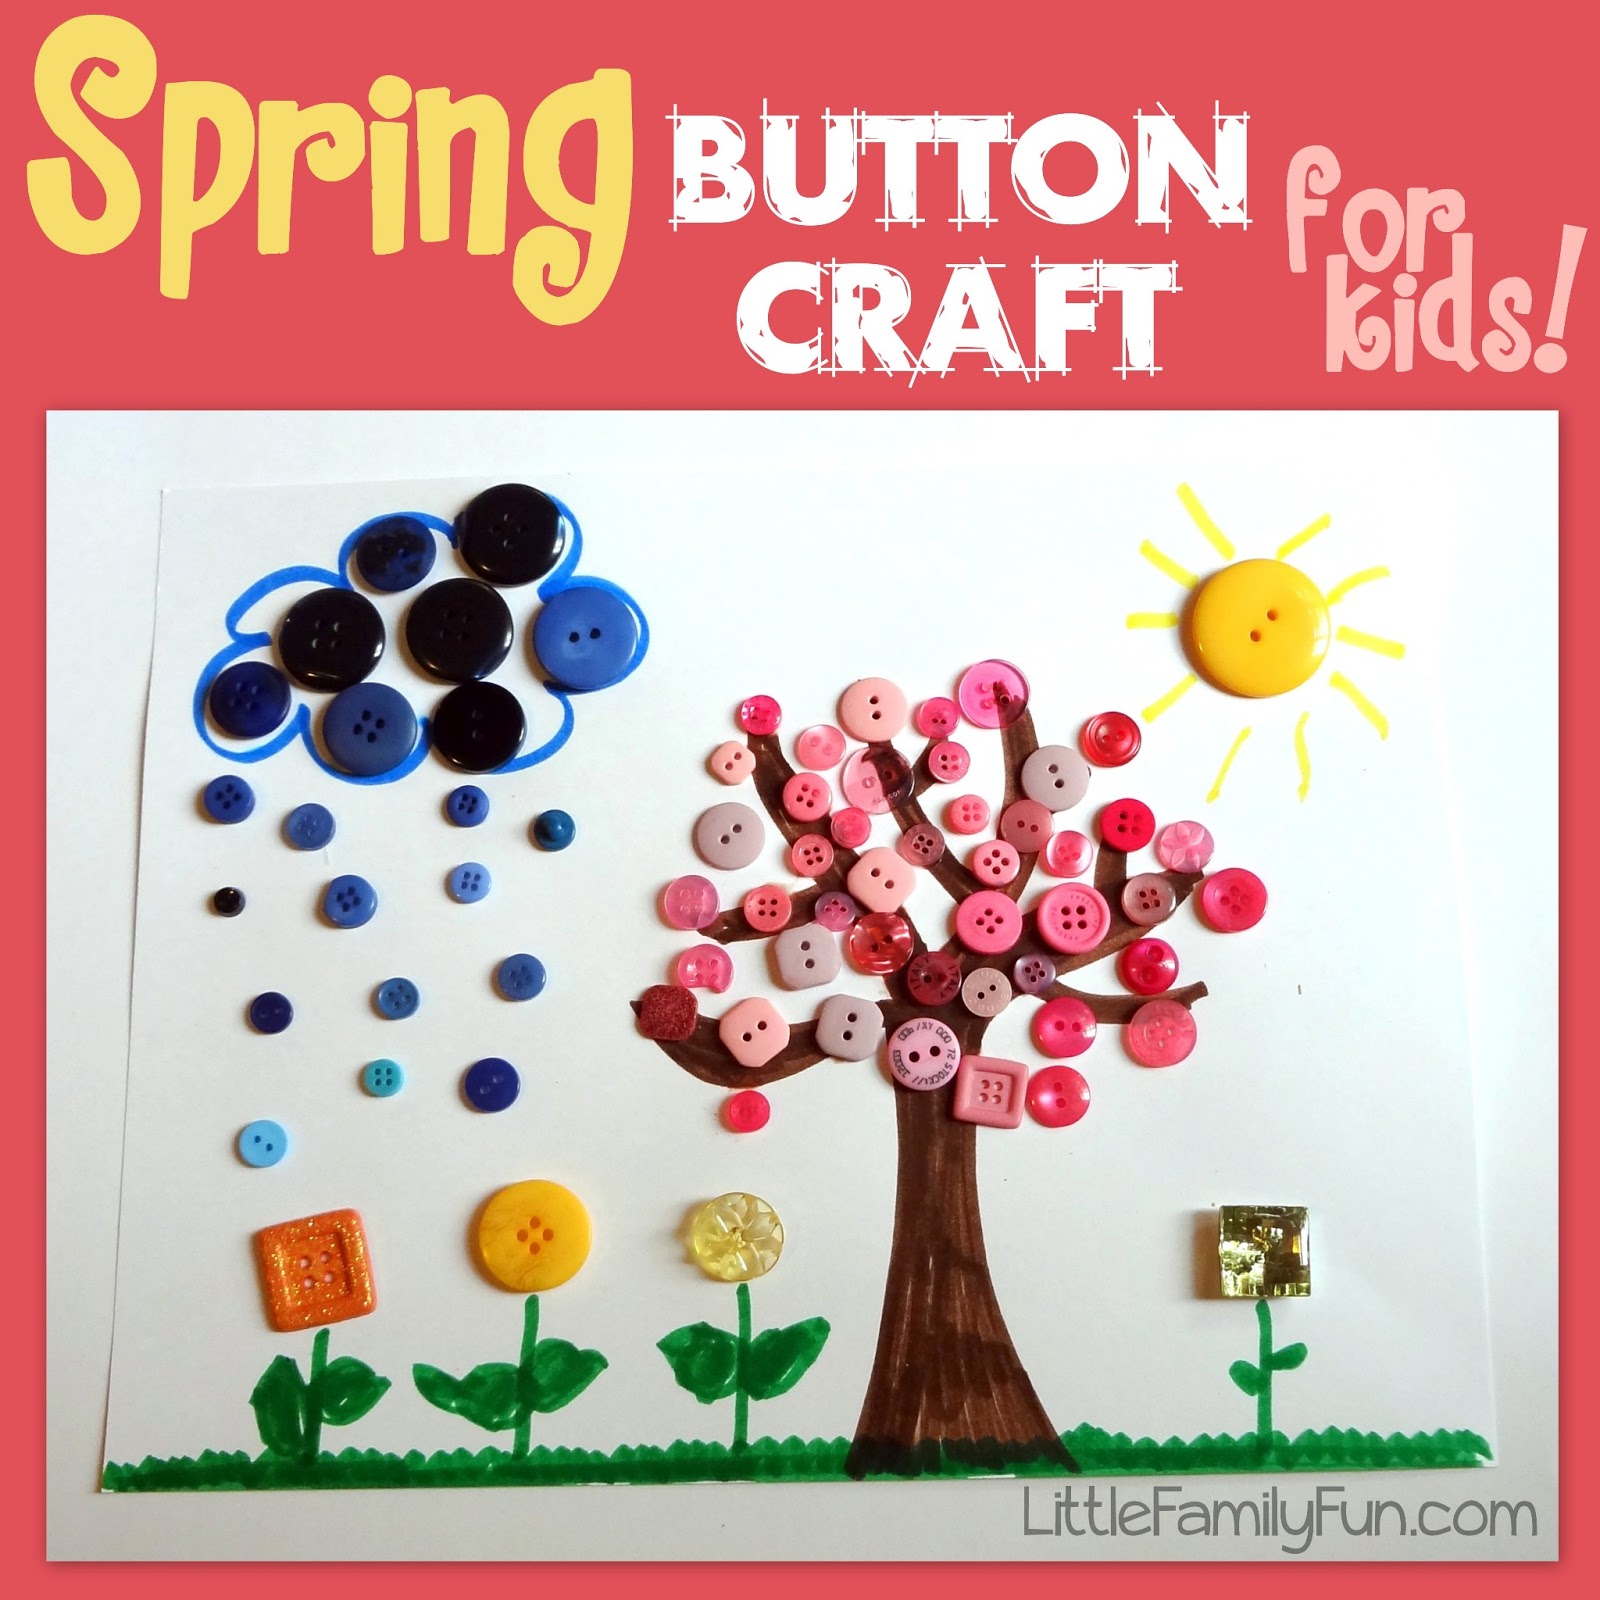 Little Family Fun: Spring Button Craft for Kids!